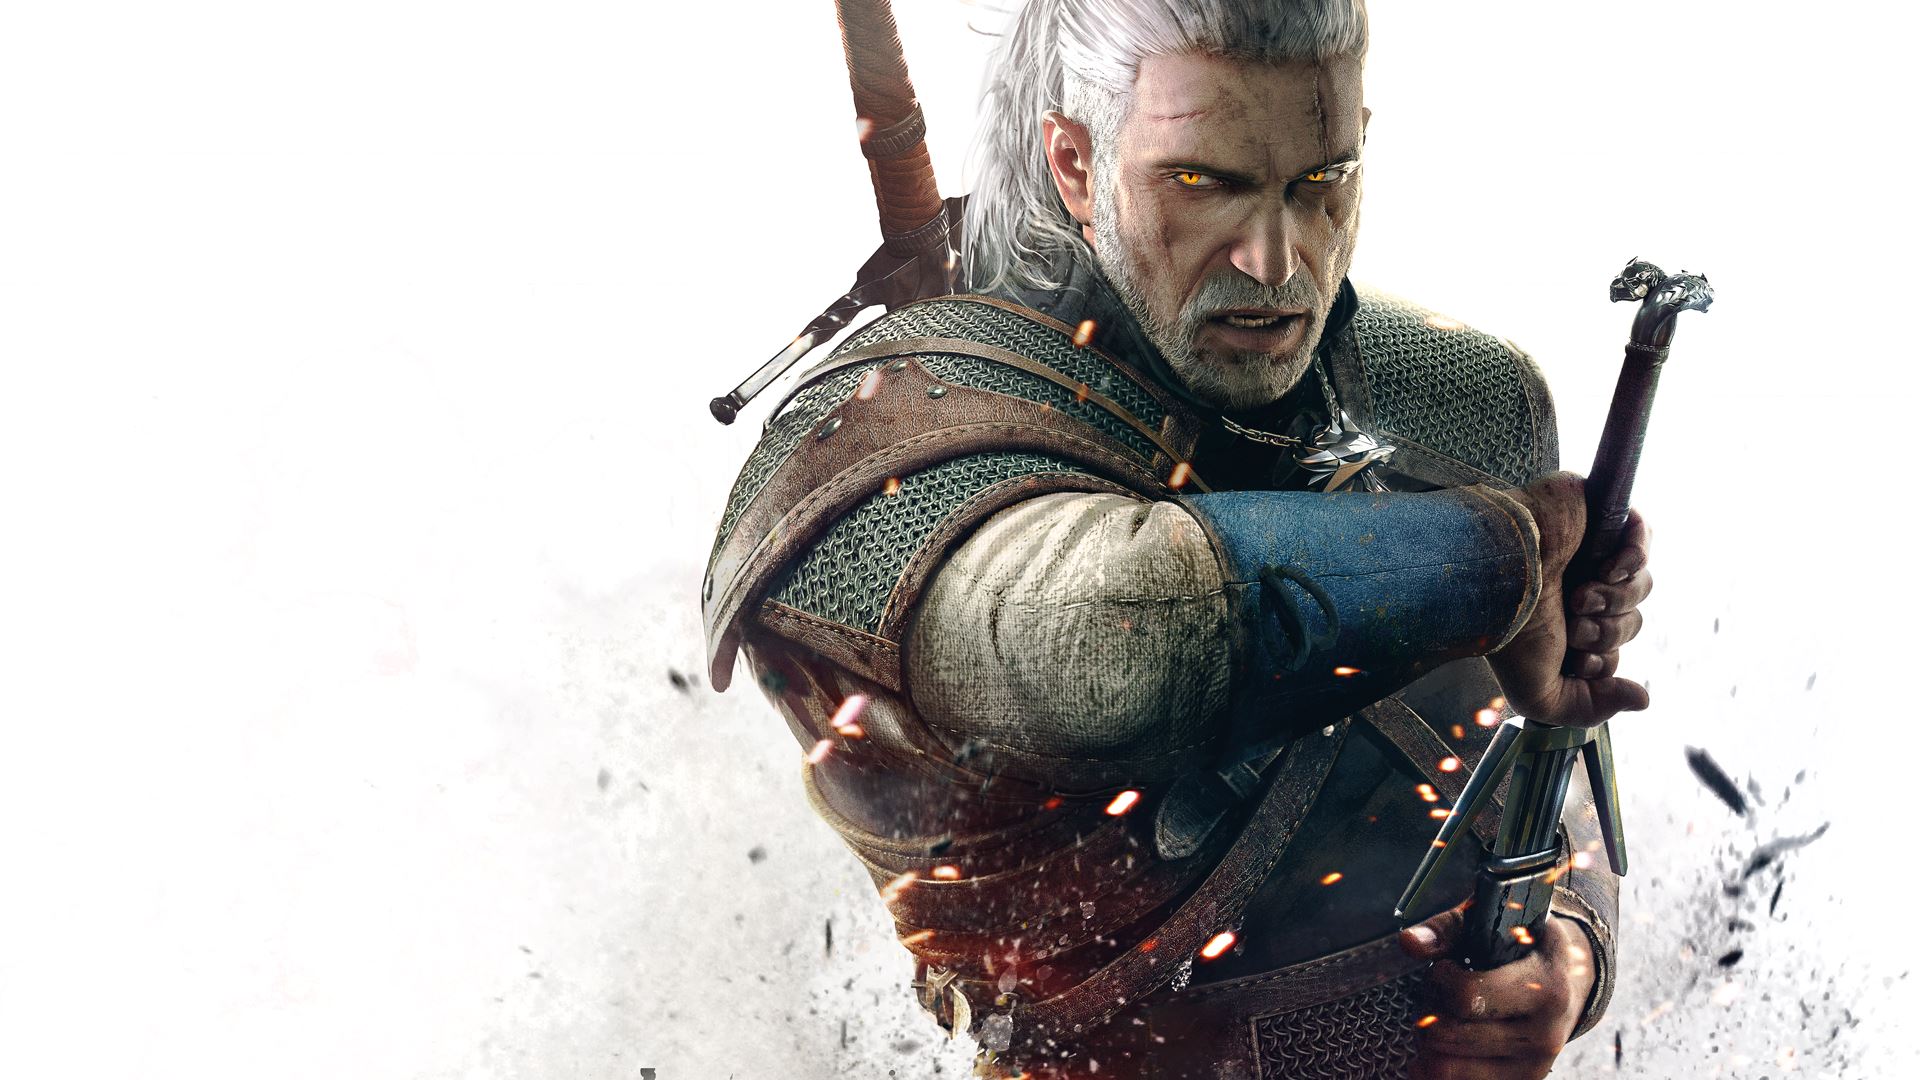 witcher_pic1-the-witcher-3-wild-hunt-feb